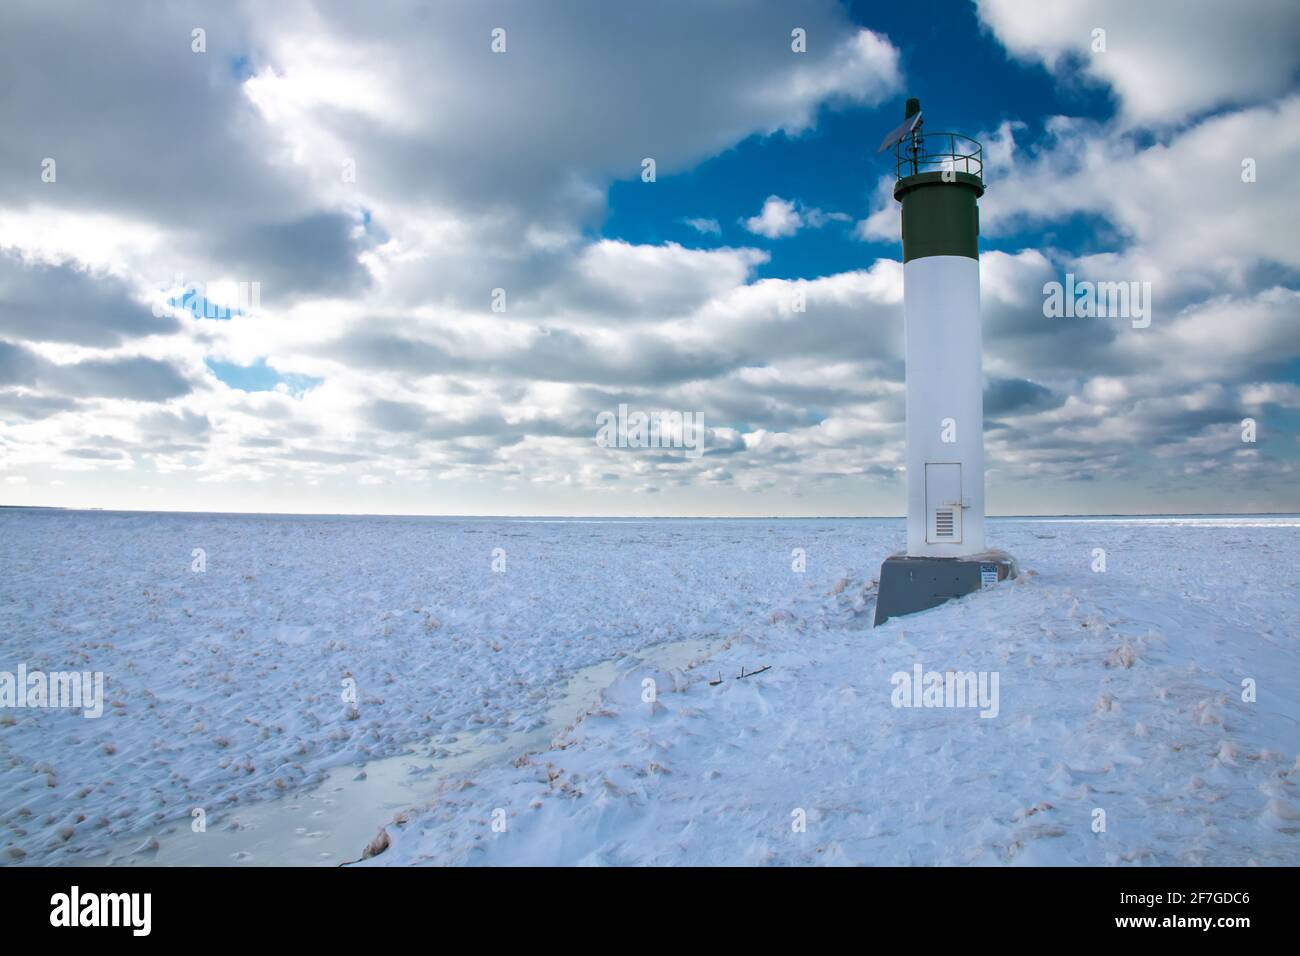 Grand Bend, Ontario, Canada - At the edge of the Grand Bend Pier, the lighthouse looks out onto a thick carpet of ice amid a polar vortex cold snap. Stock Photo